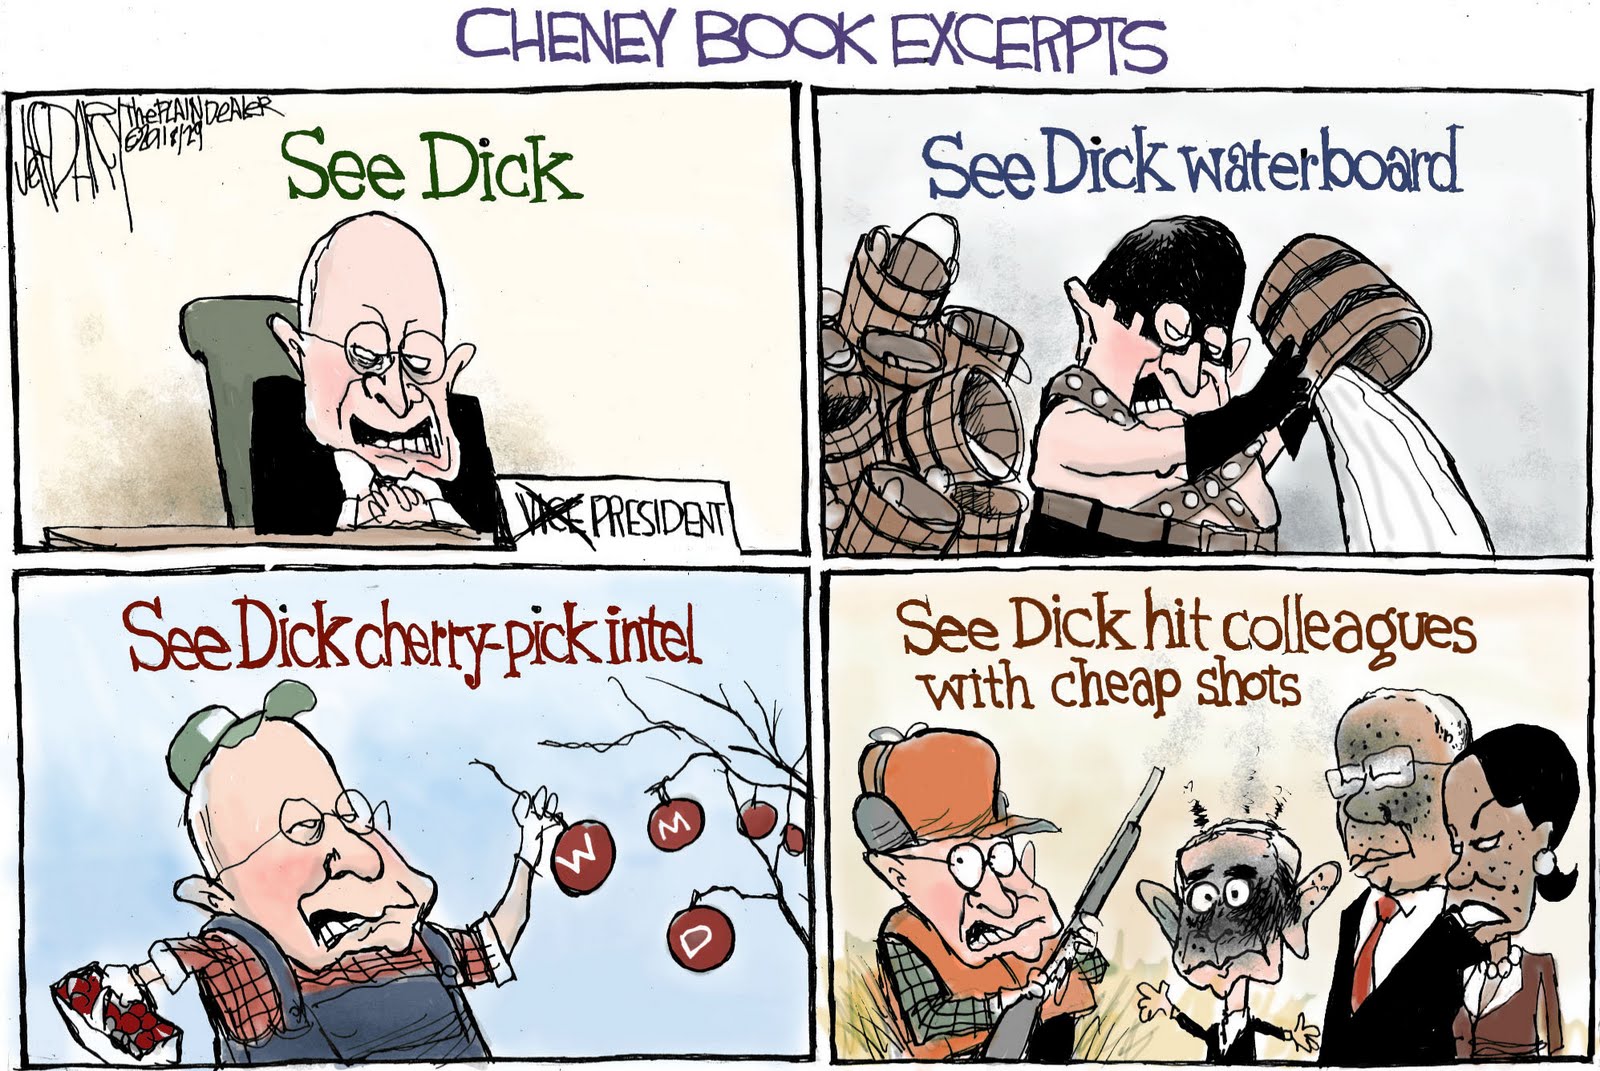 Whose heart did dick cheney